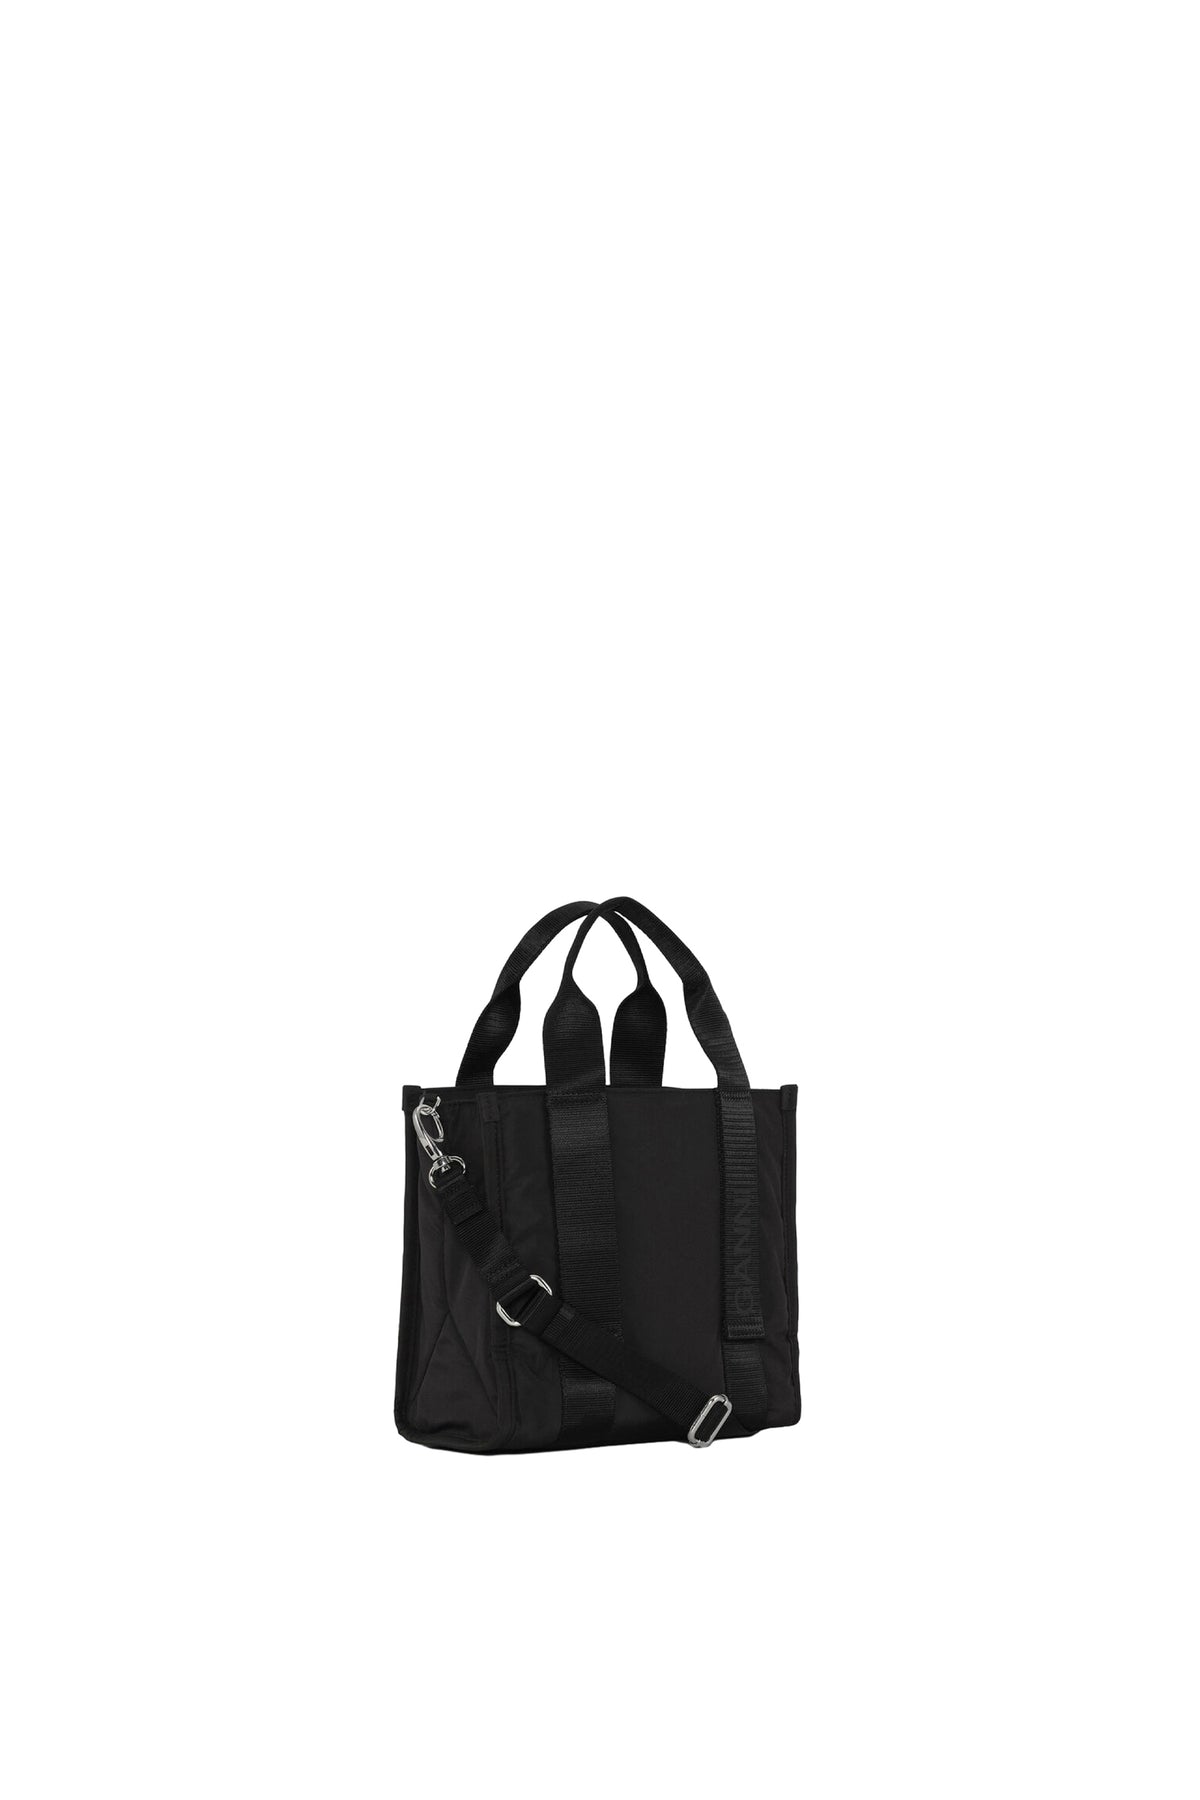 GANNI RECYCLED SMALL TOTE / BLK